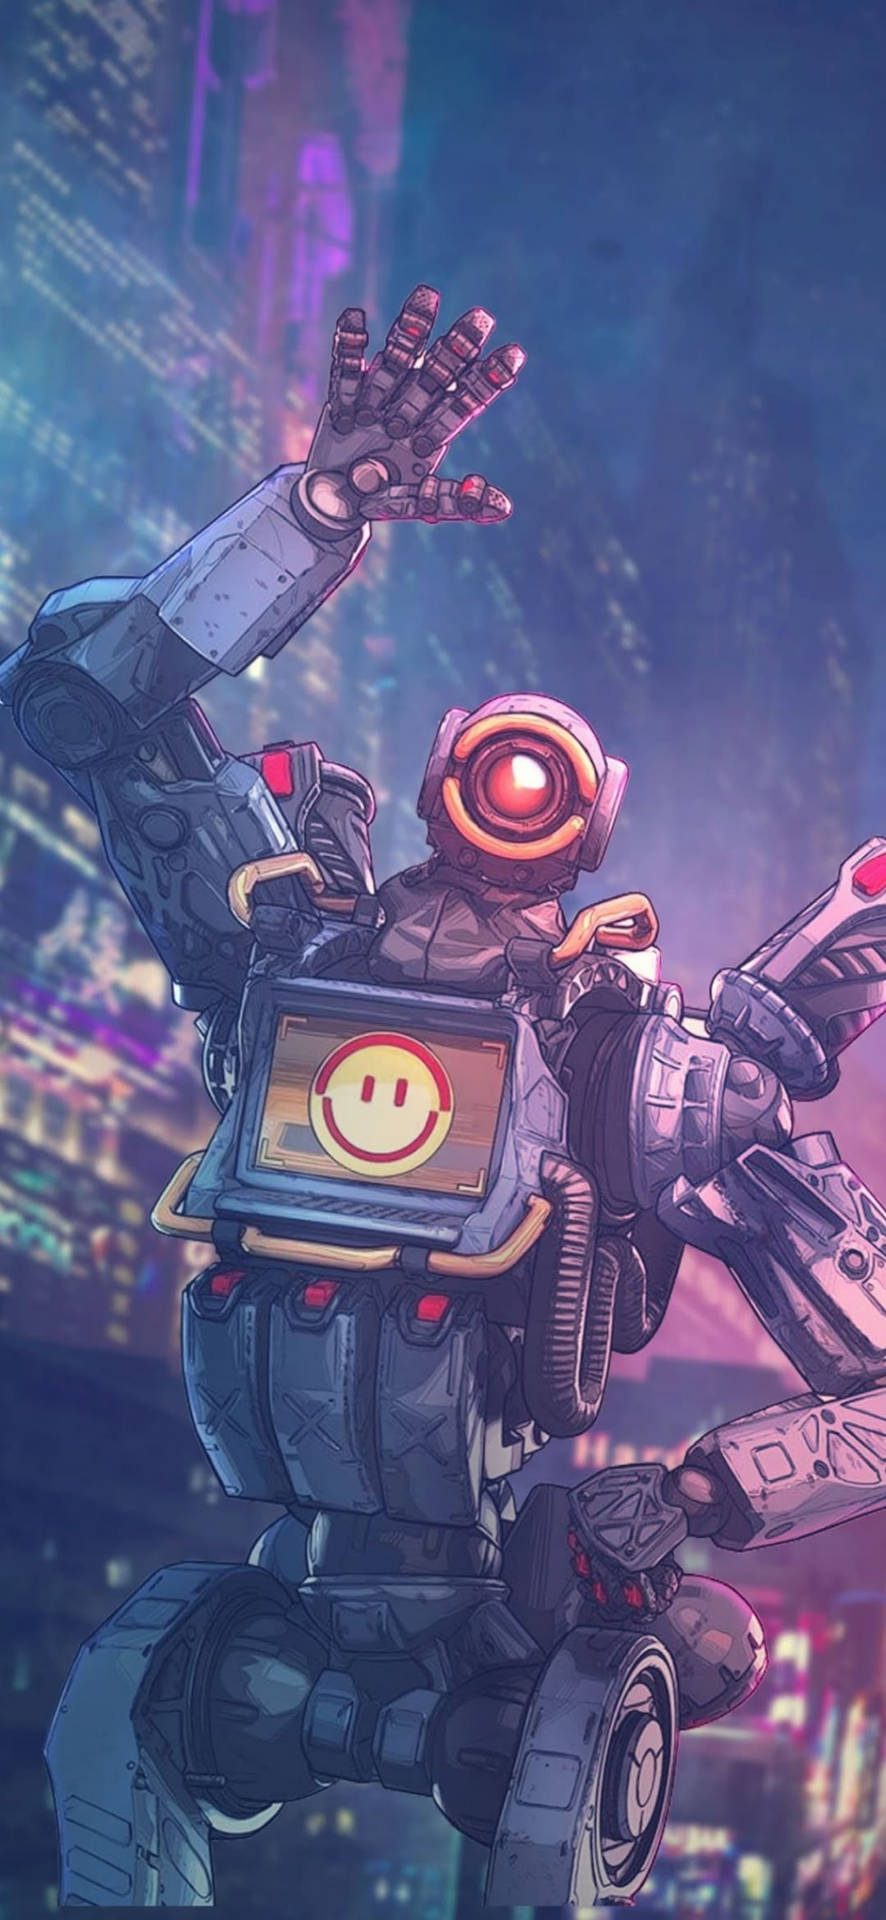 Pathfindercool Apex Legends Can Be Translated To Italian As 